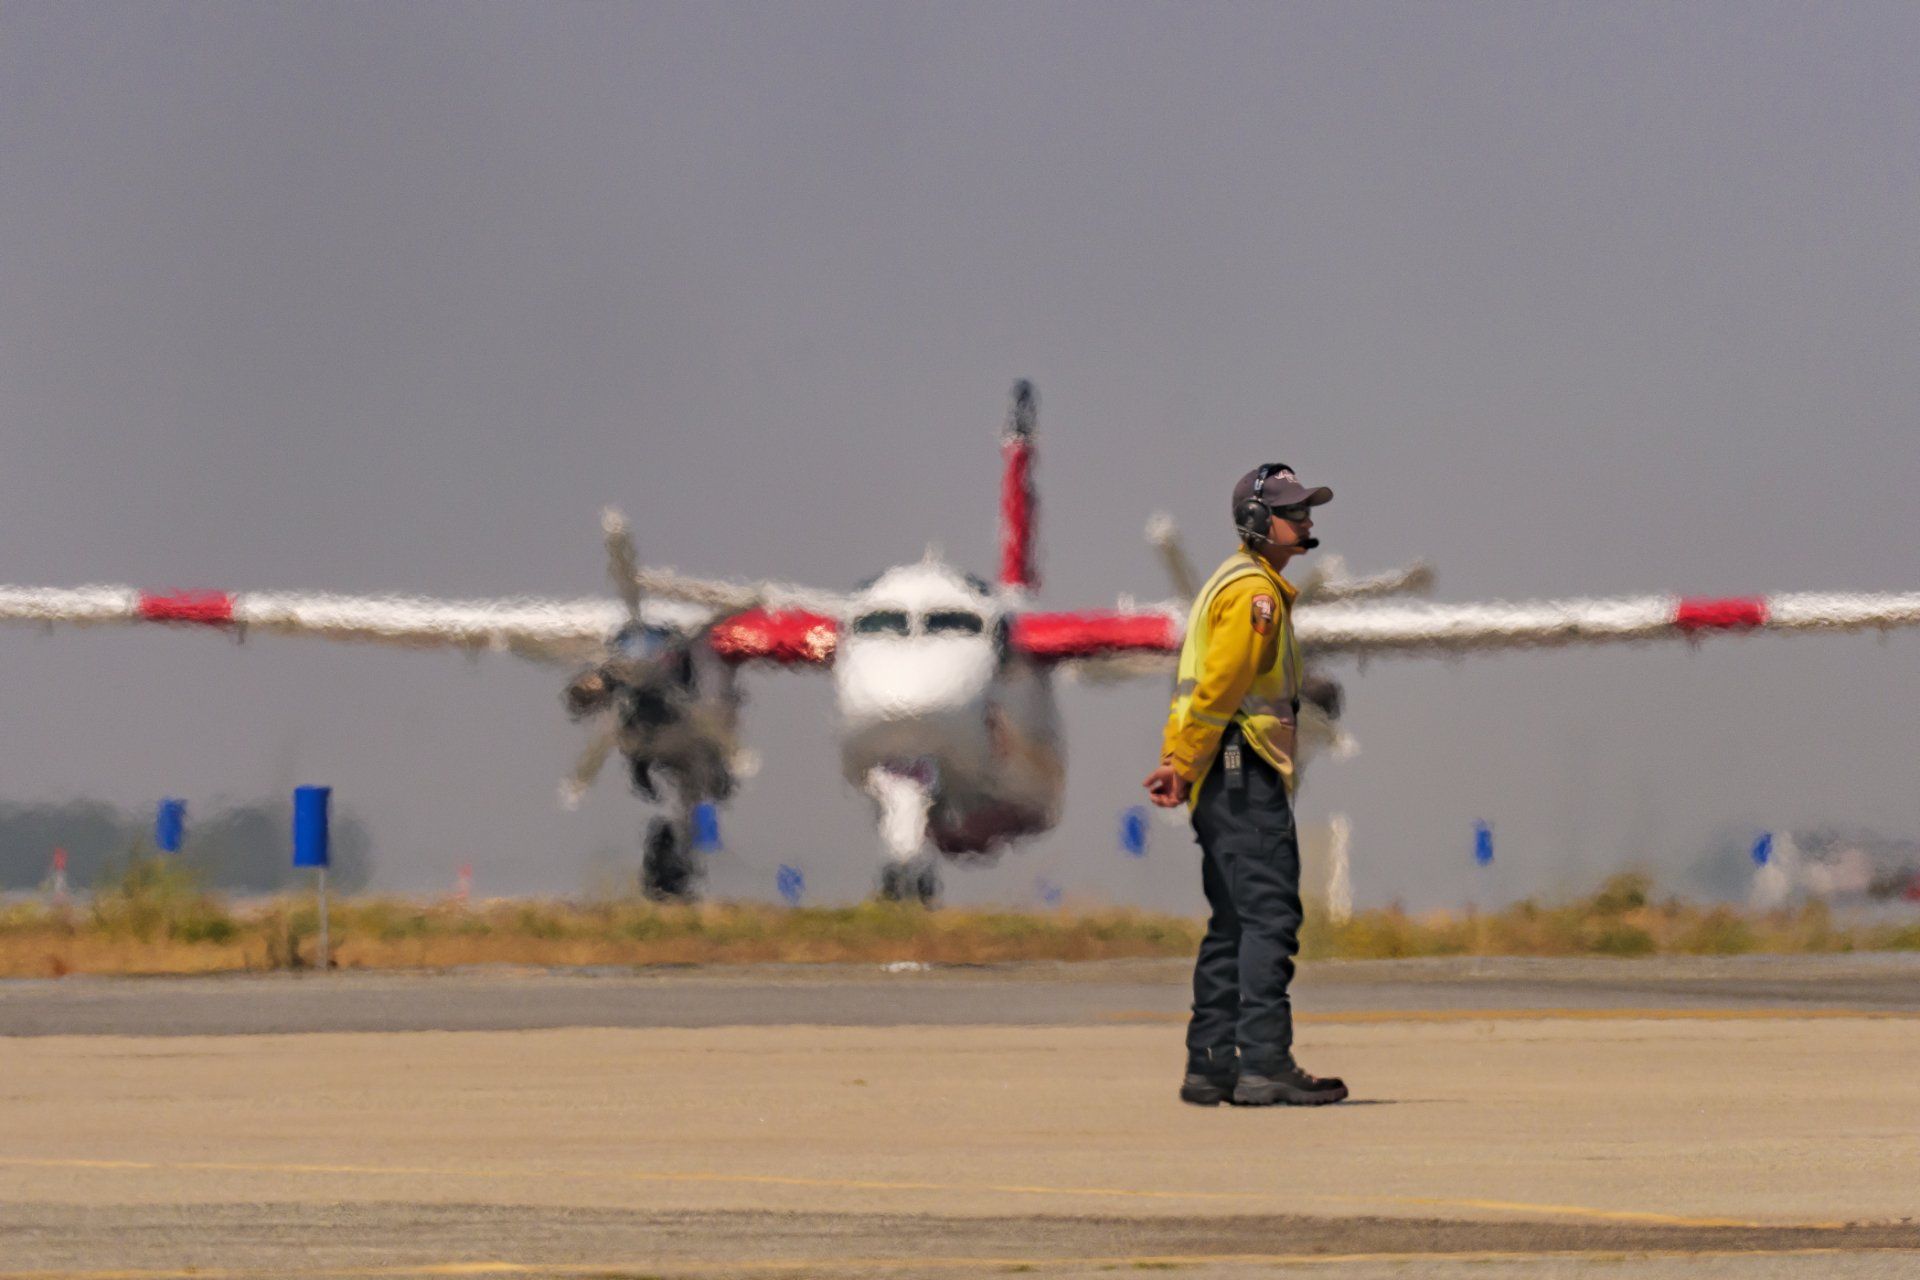 Ground crew at Hollister Air Attack Base.